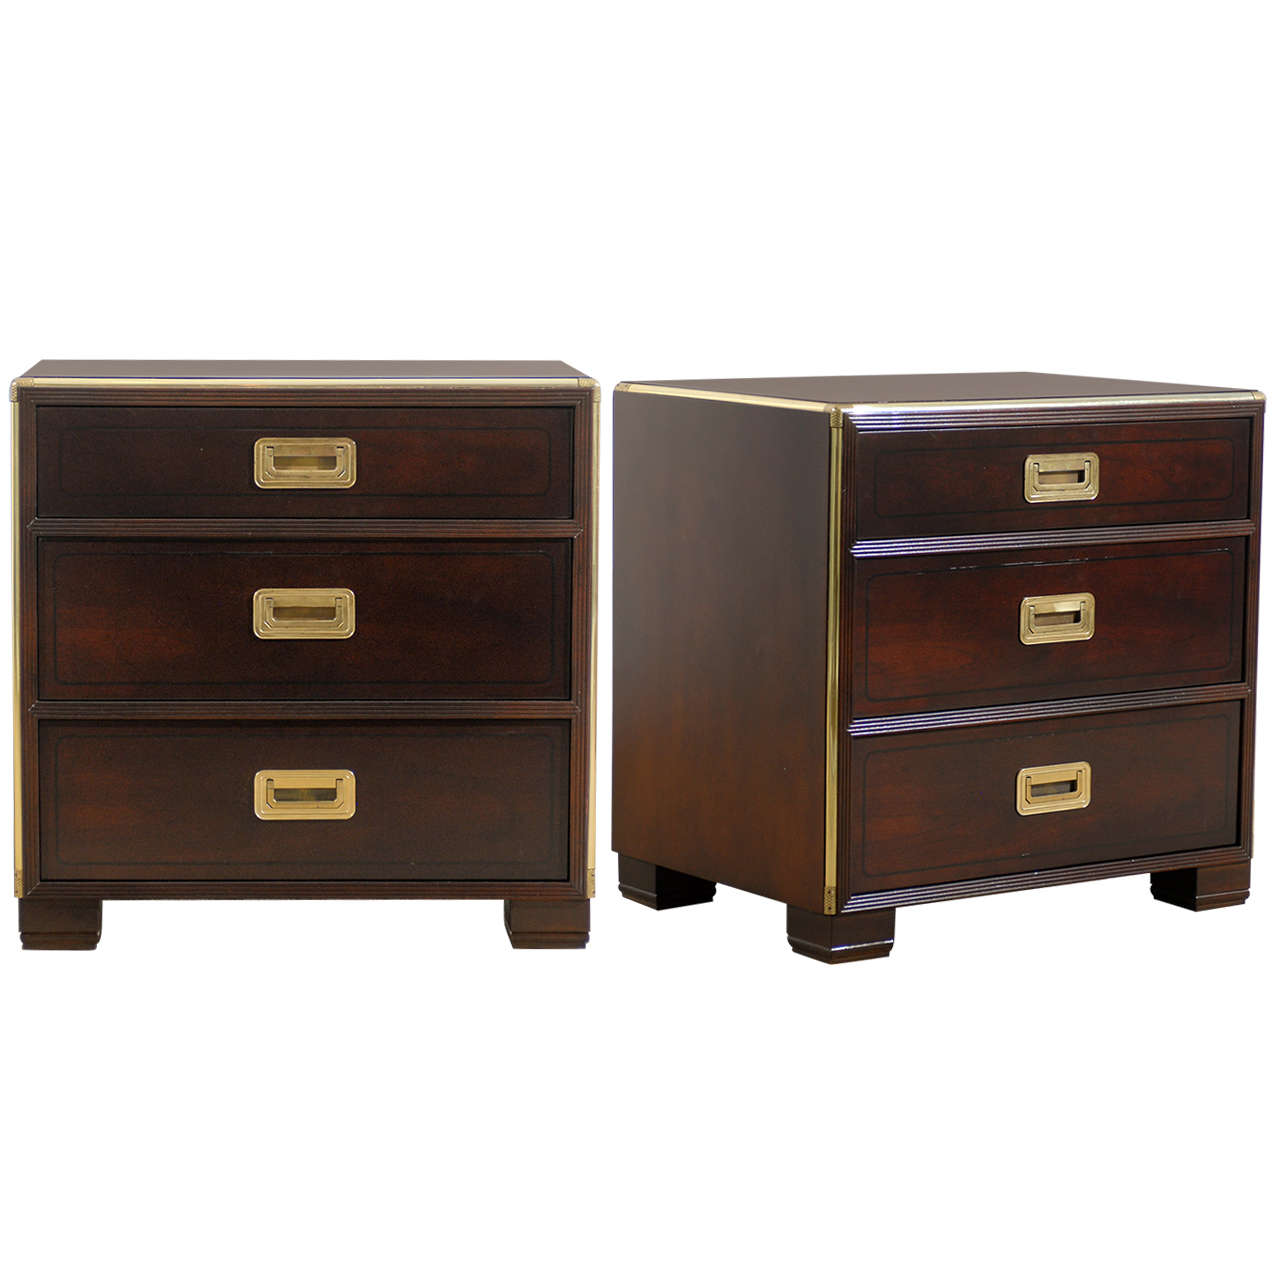 Pair of Baker Campaign Chests in Espresso Lacquer